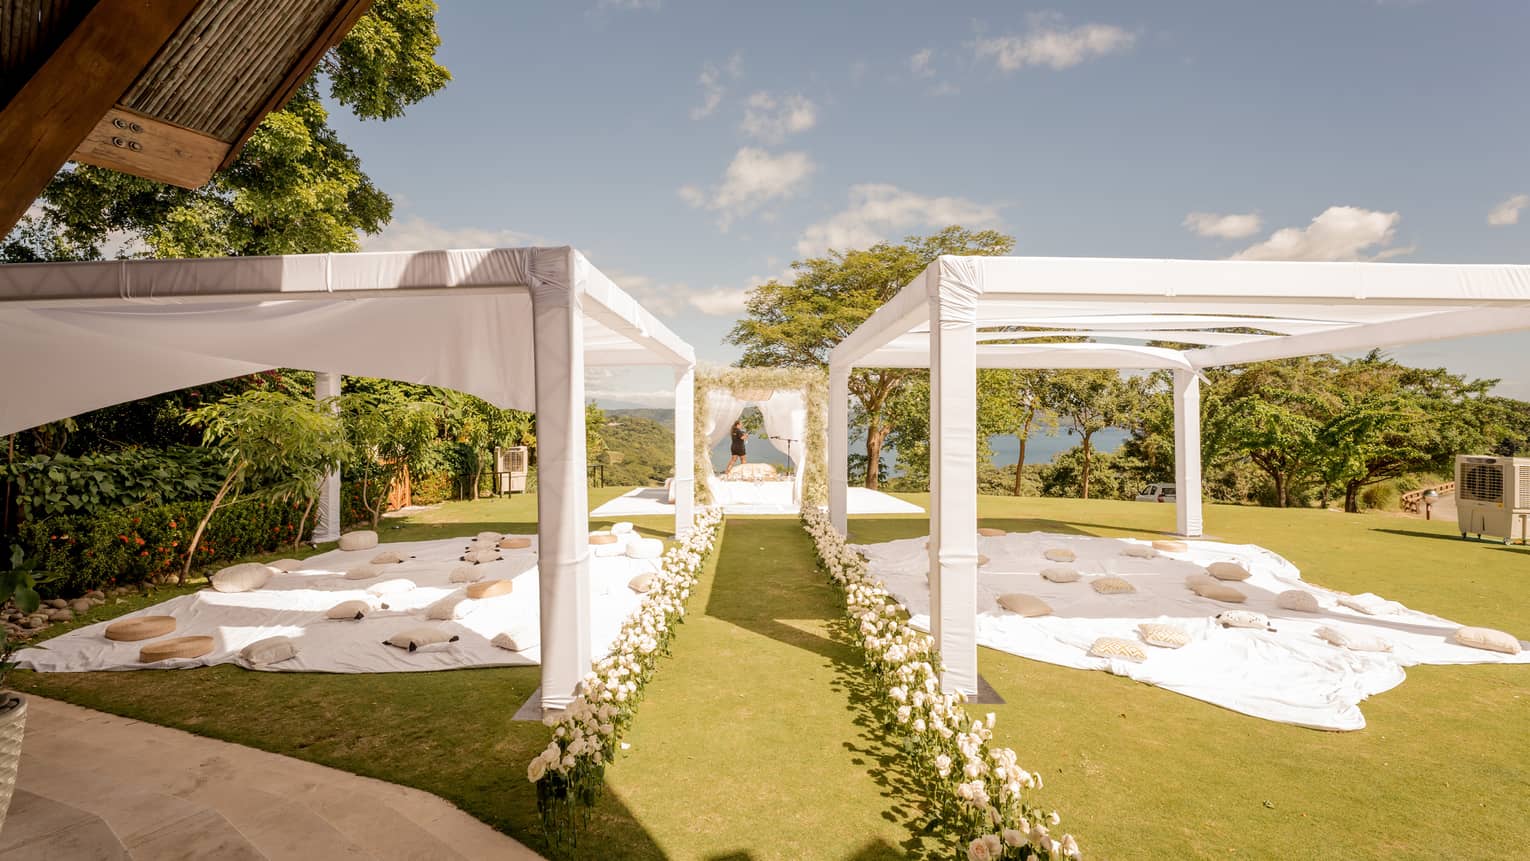 Covered wedding reception area on green lawn, aisle decorated with flowers